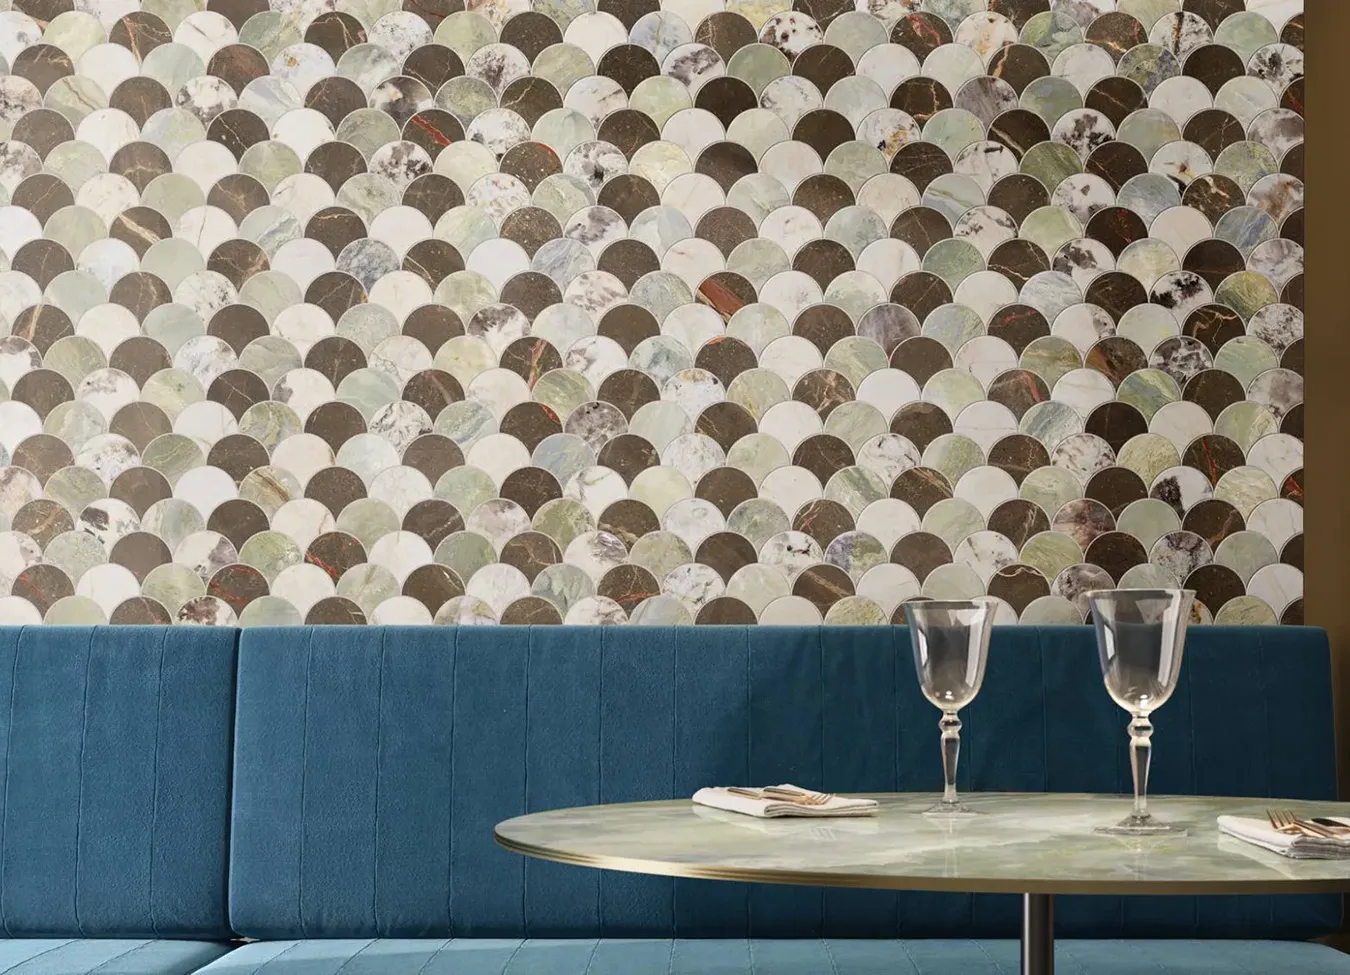 Marble effect stoneware wall with mosaic design from the 9cento collection in a stylish restaurant setting.